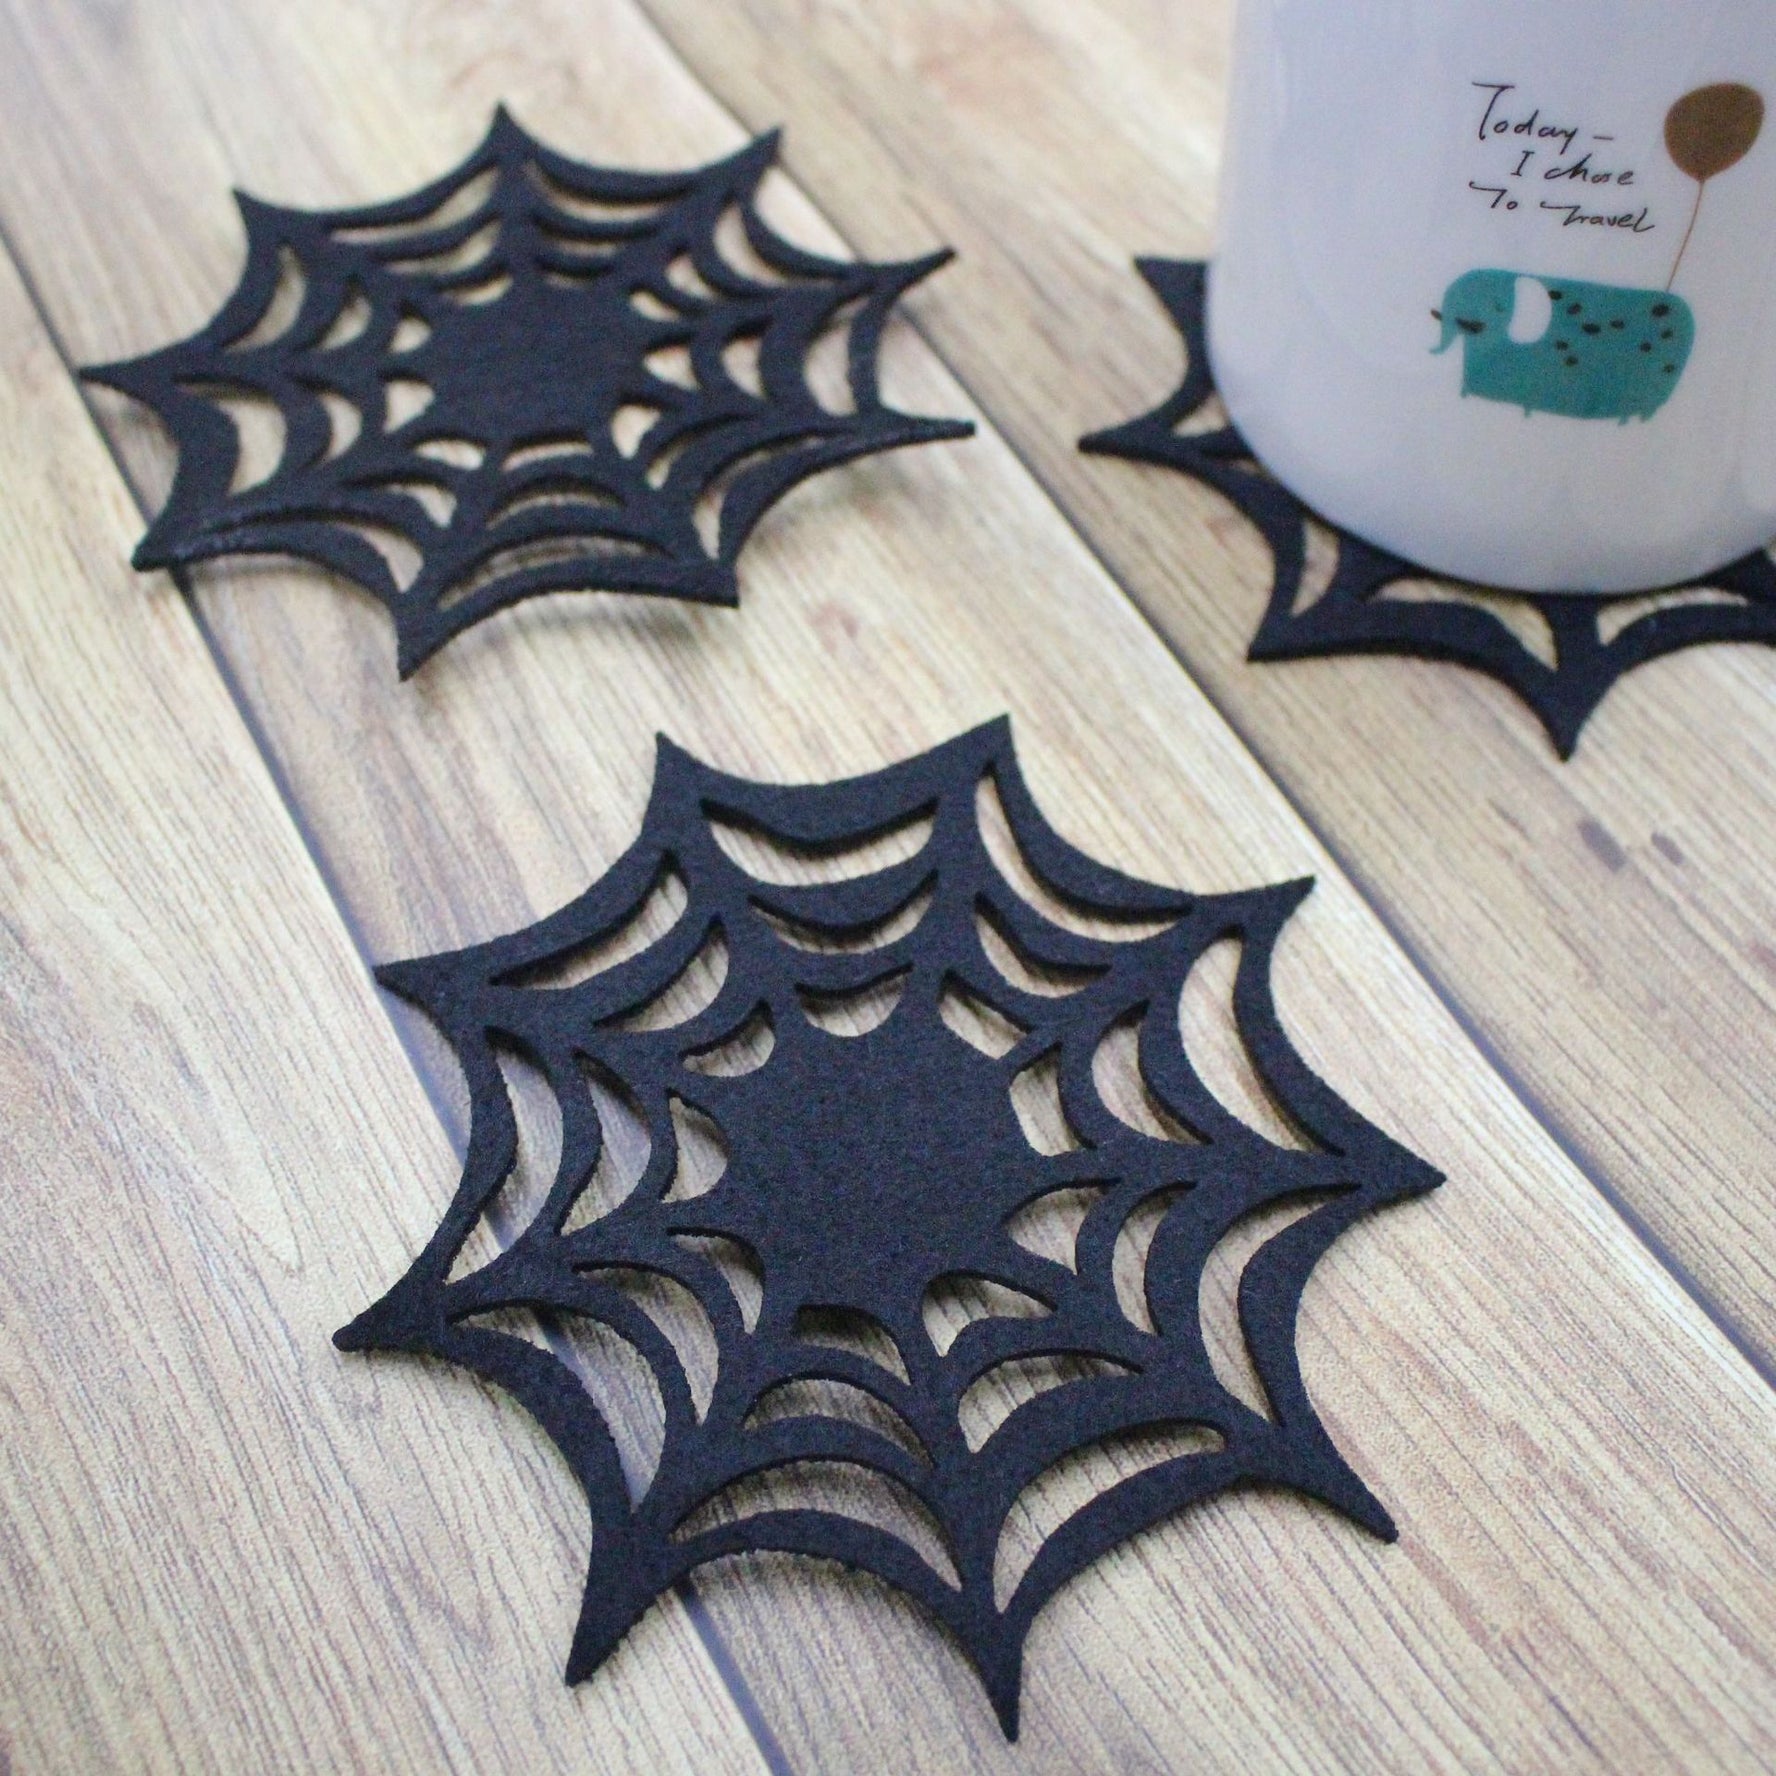 Spider web coaster Curated Room Kits